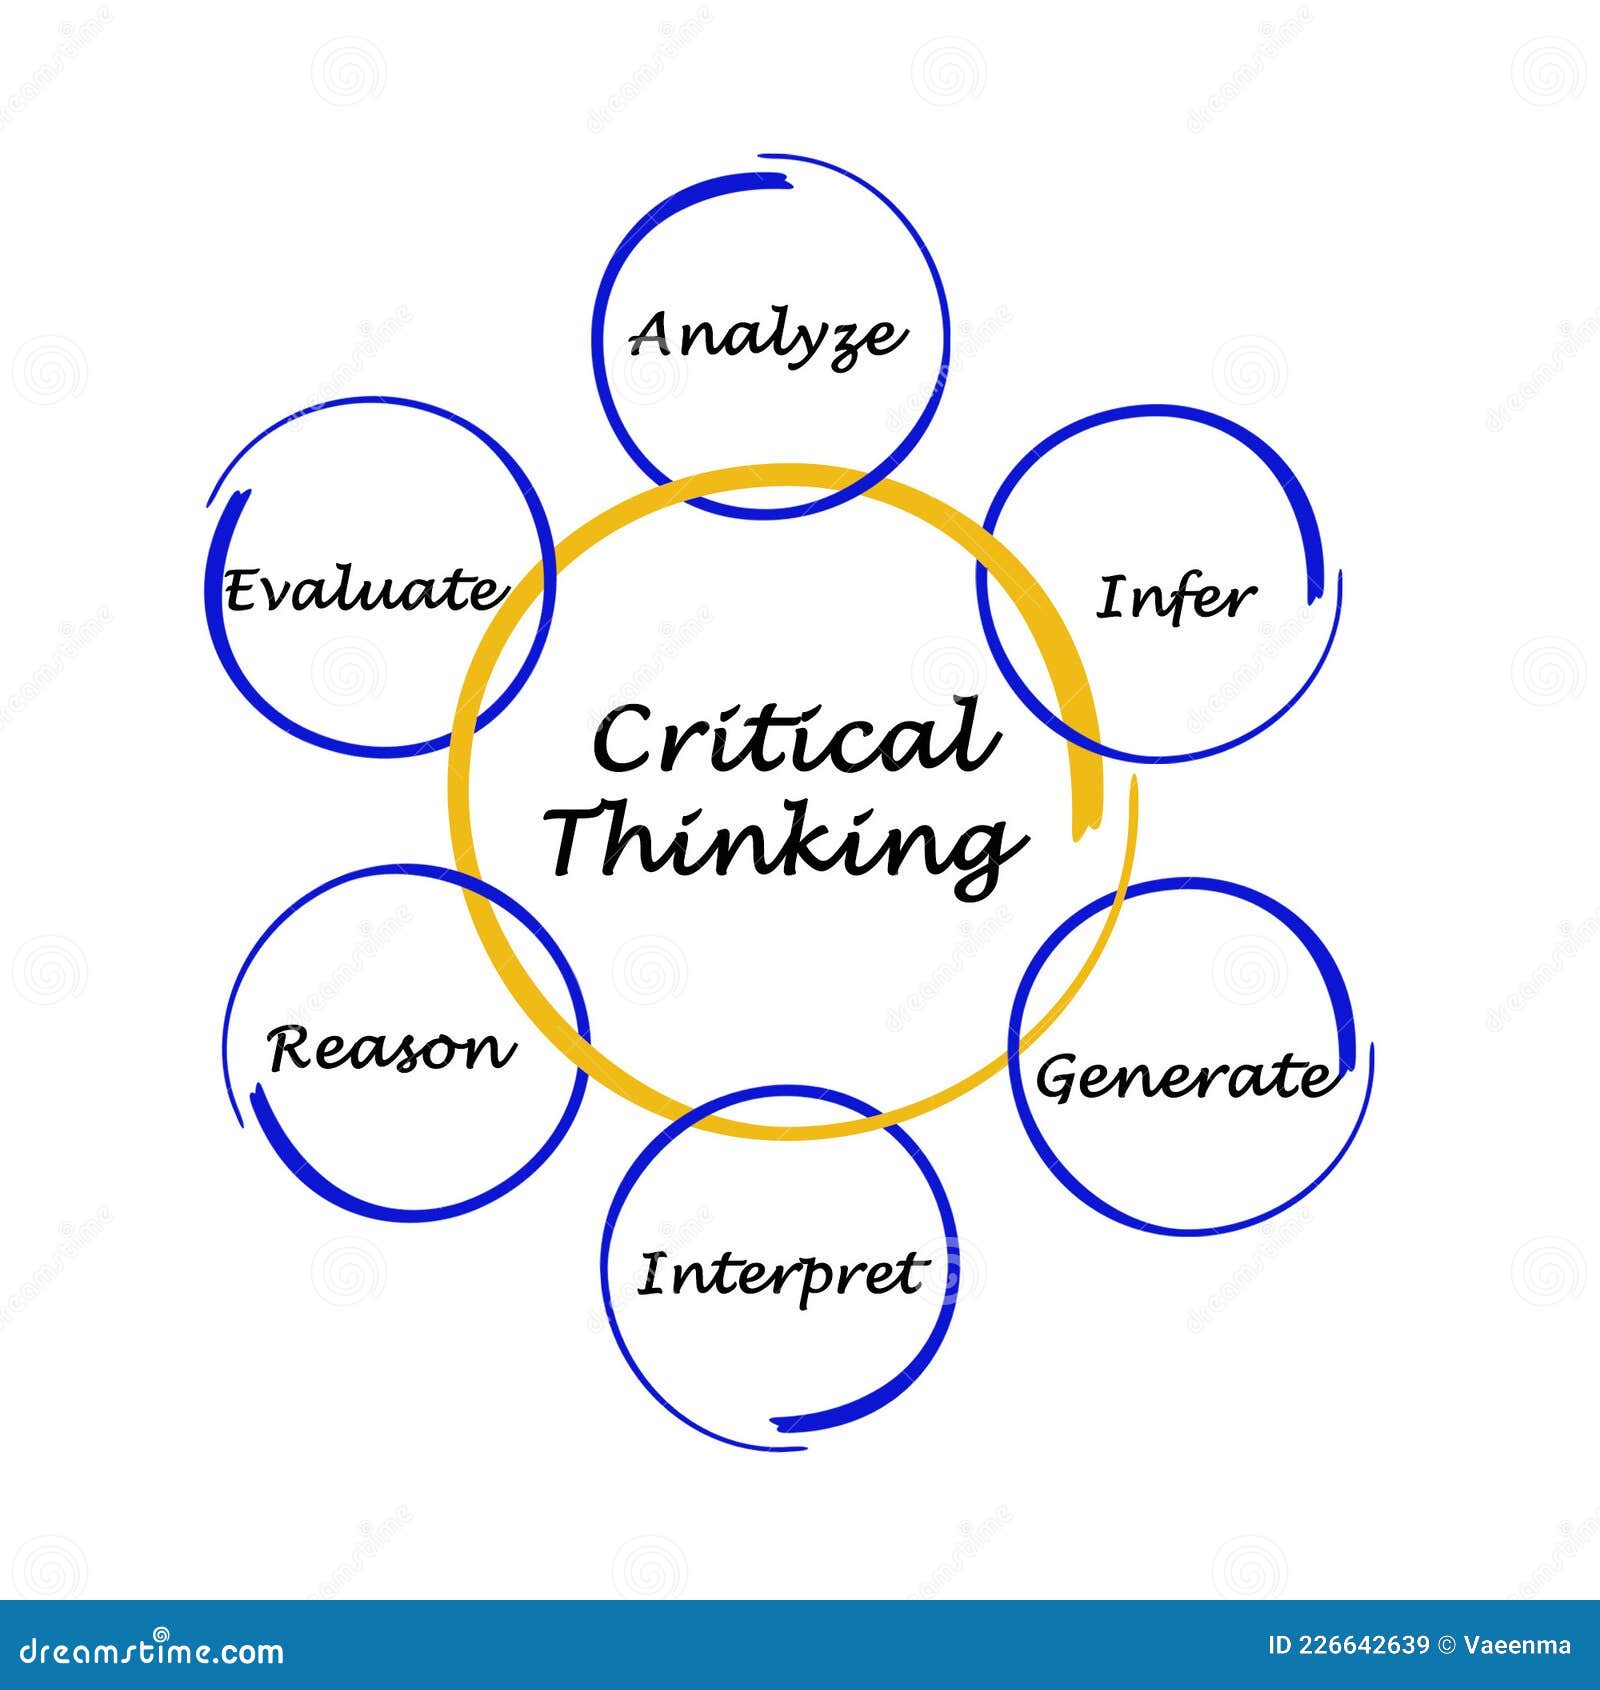 5th component of critical thinking